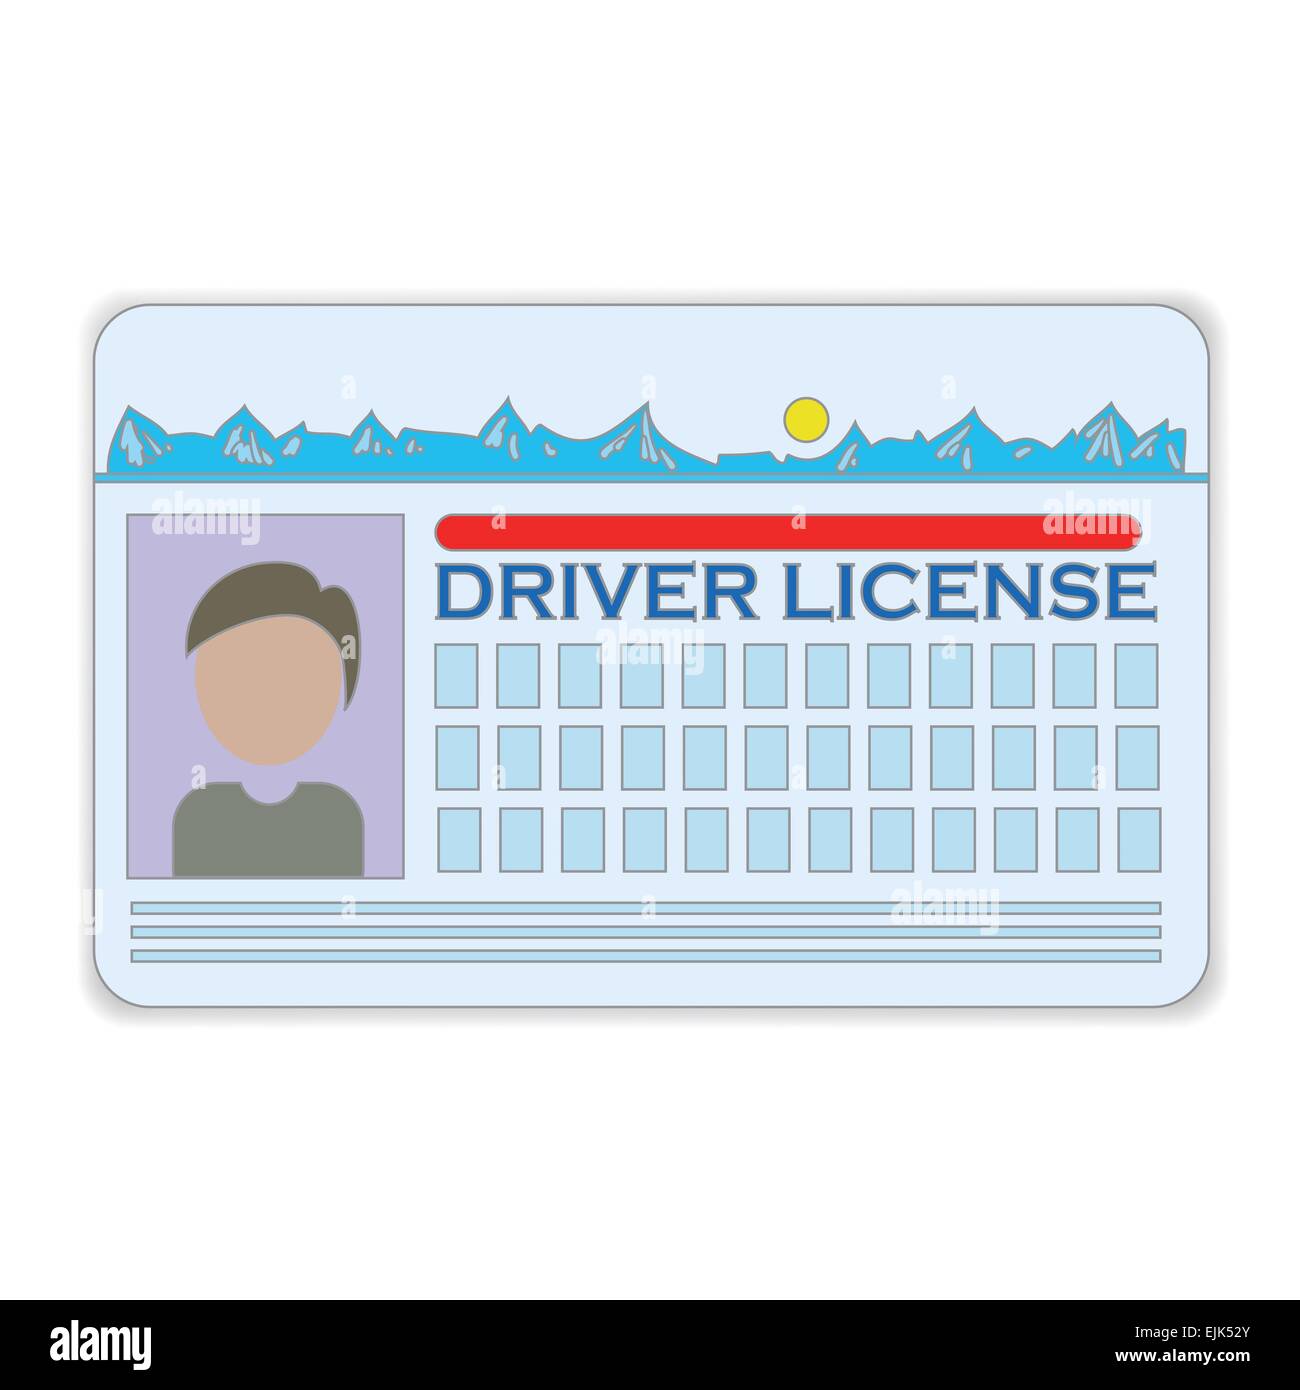 colorful illustration with driver license  on a white background Stock Photo